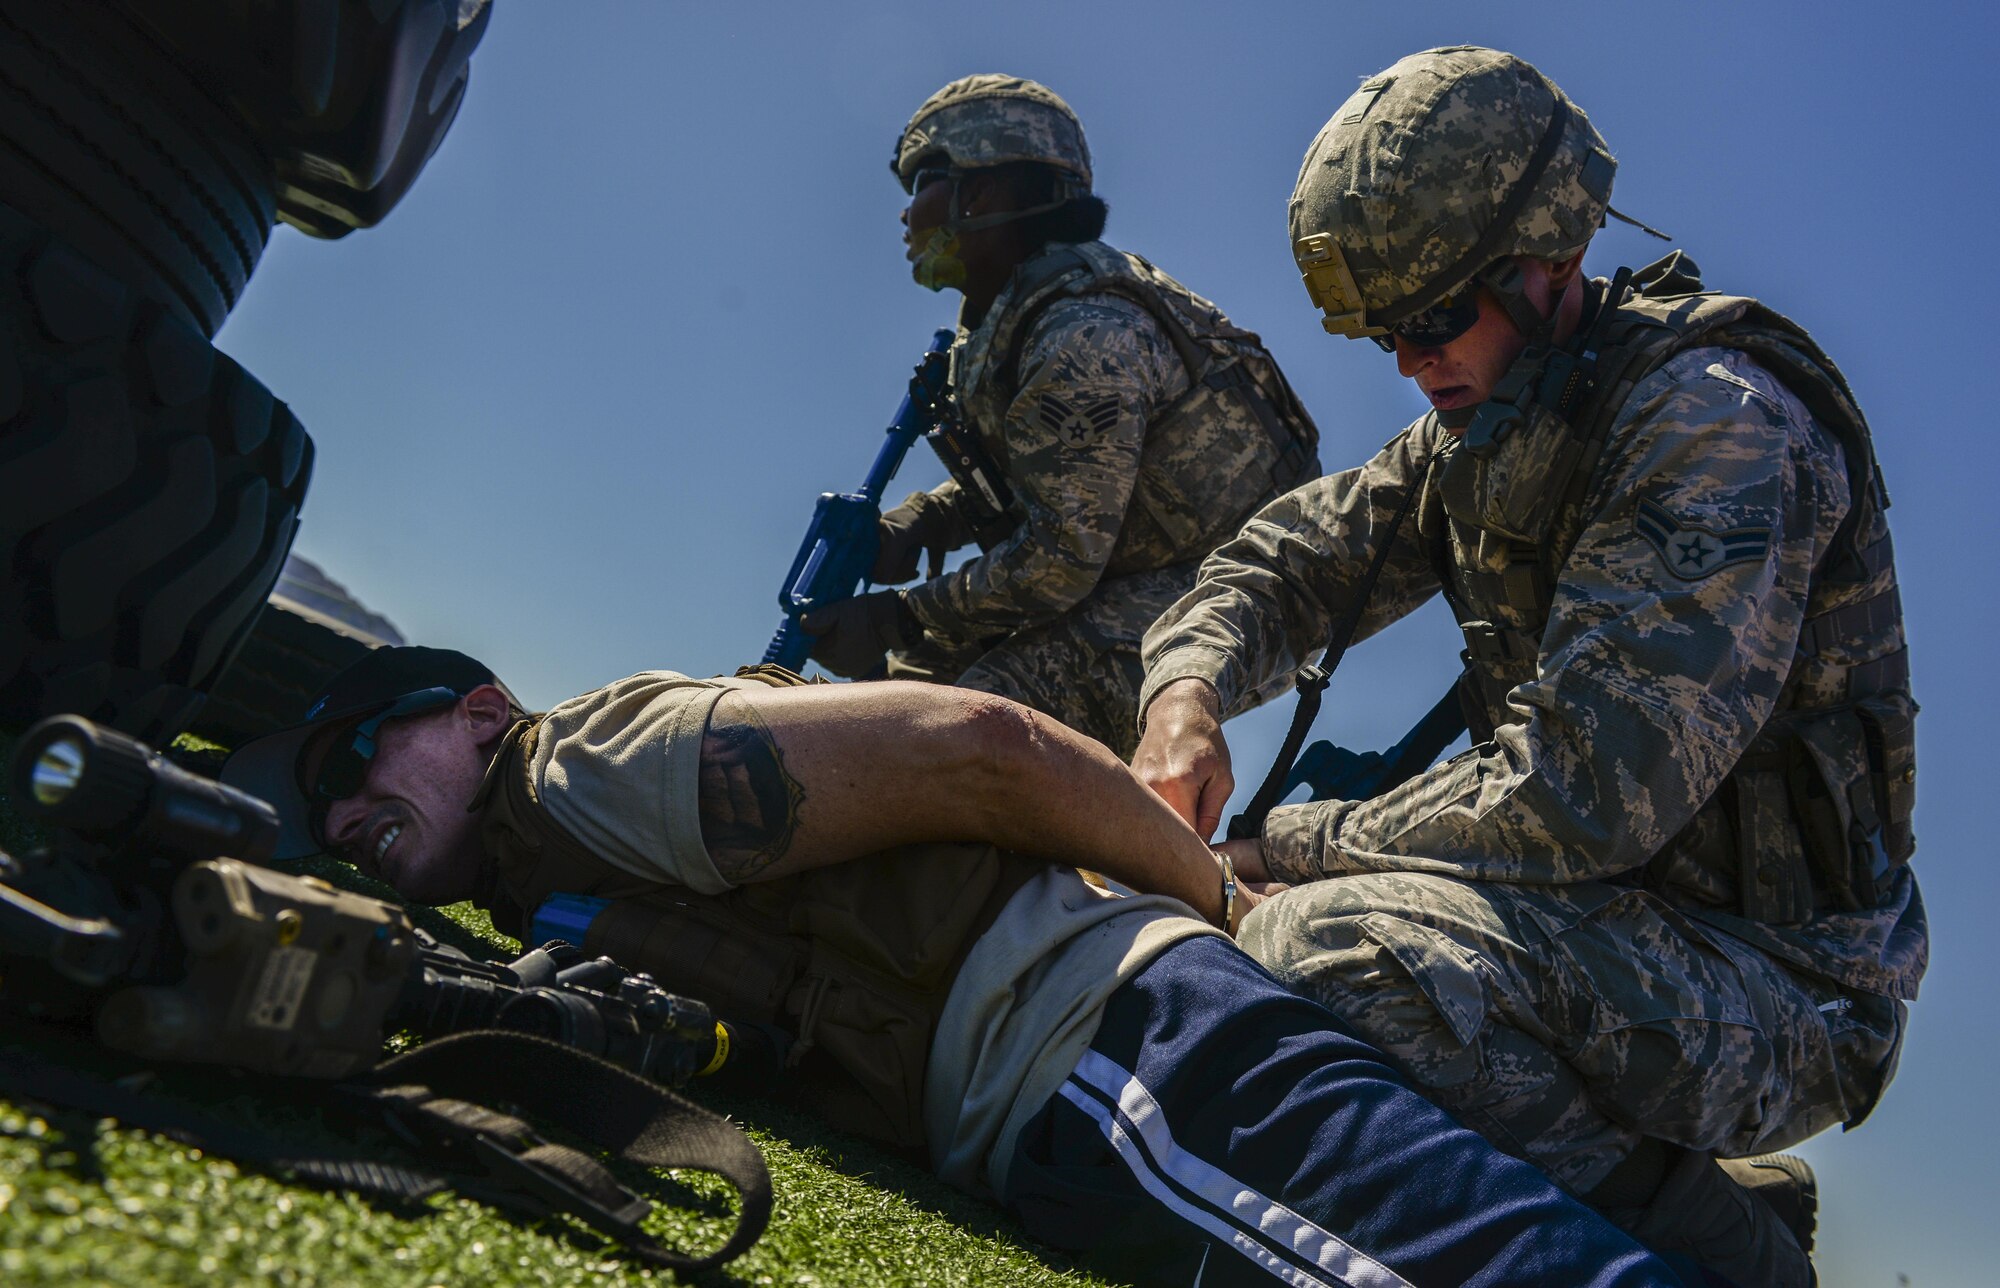 Airman 1st Class Robert Siegmann, 99th Security Forces Squadron, subdues and handcuffs a simulated active shooter during a base wide exercise at Nellis Air Force Base, Nev., May 12, 2016. These real world scenarios combined make this exercise one of the largest in the history of Nellis AFB. (U.S. Air Force photo by Airman 1st Class Kevin Tanenbaum)